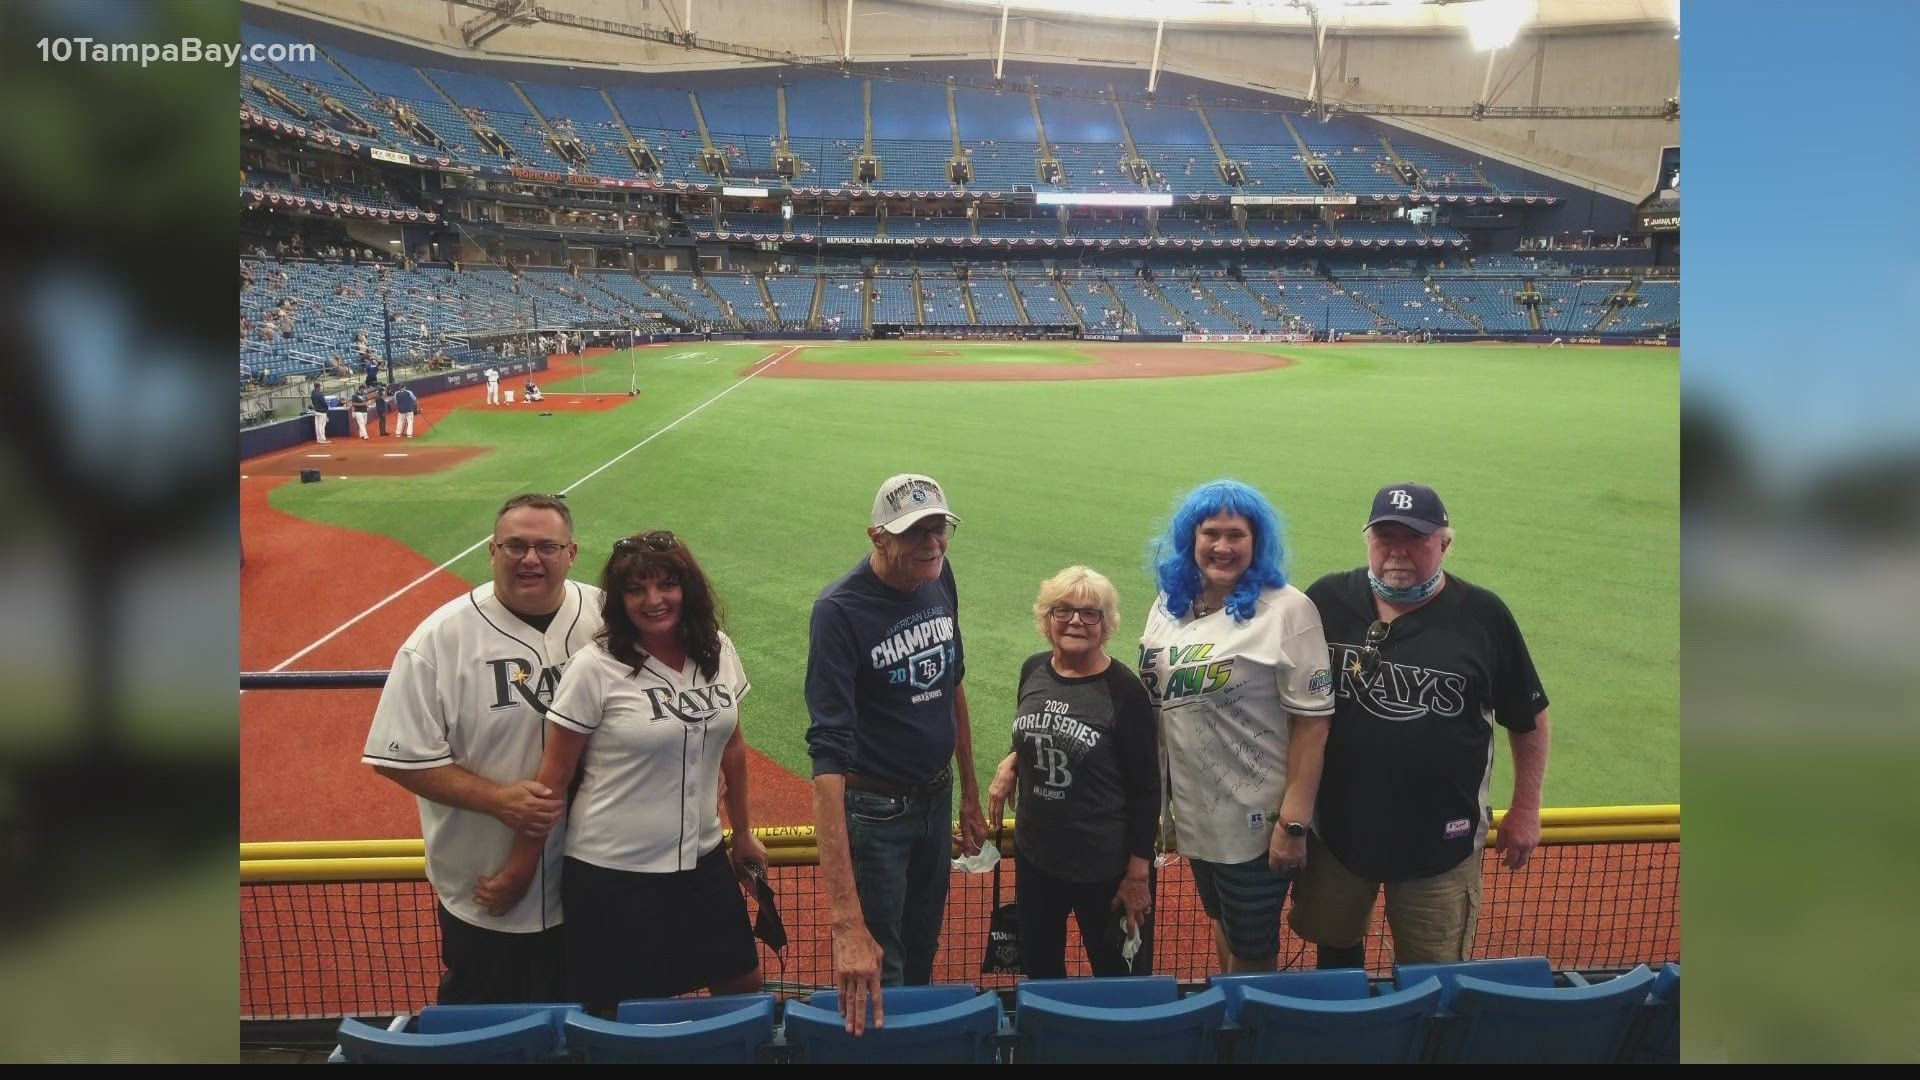 Since 1998, she has been to every Rays home opener. That was until COVID. Now, she's able to head back.